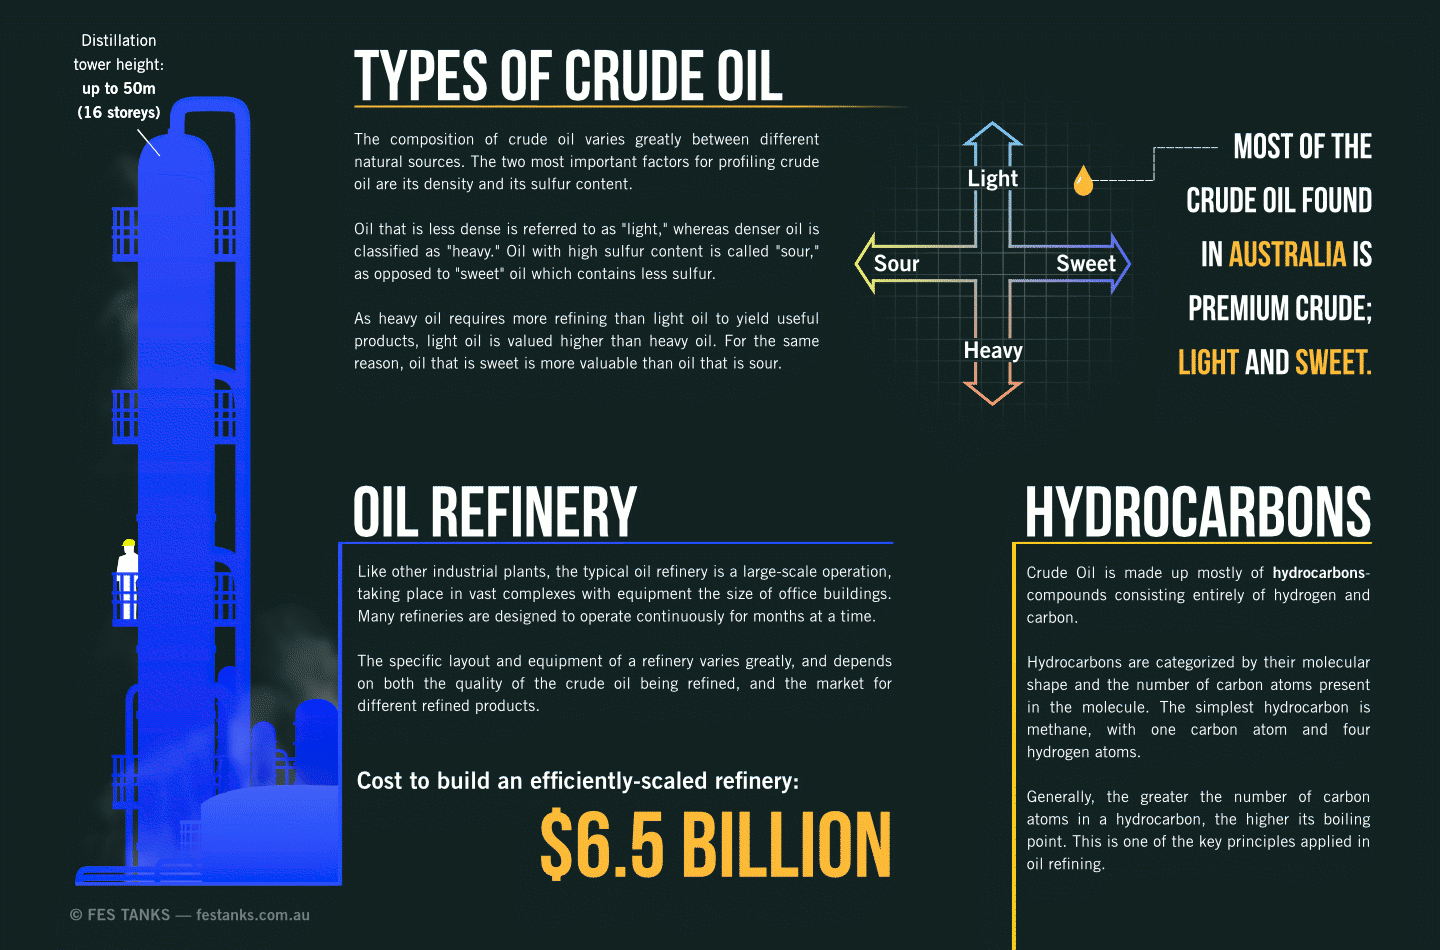 Types of crude oil